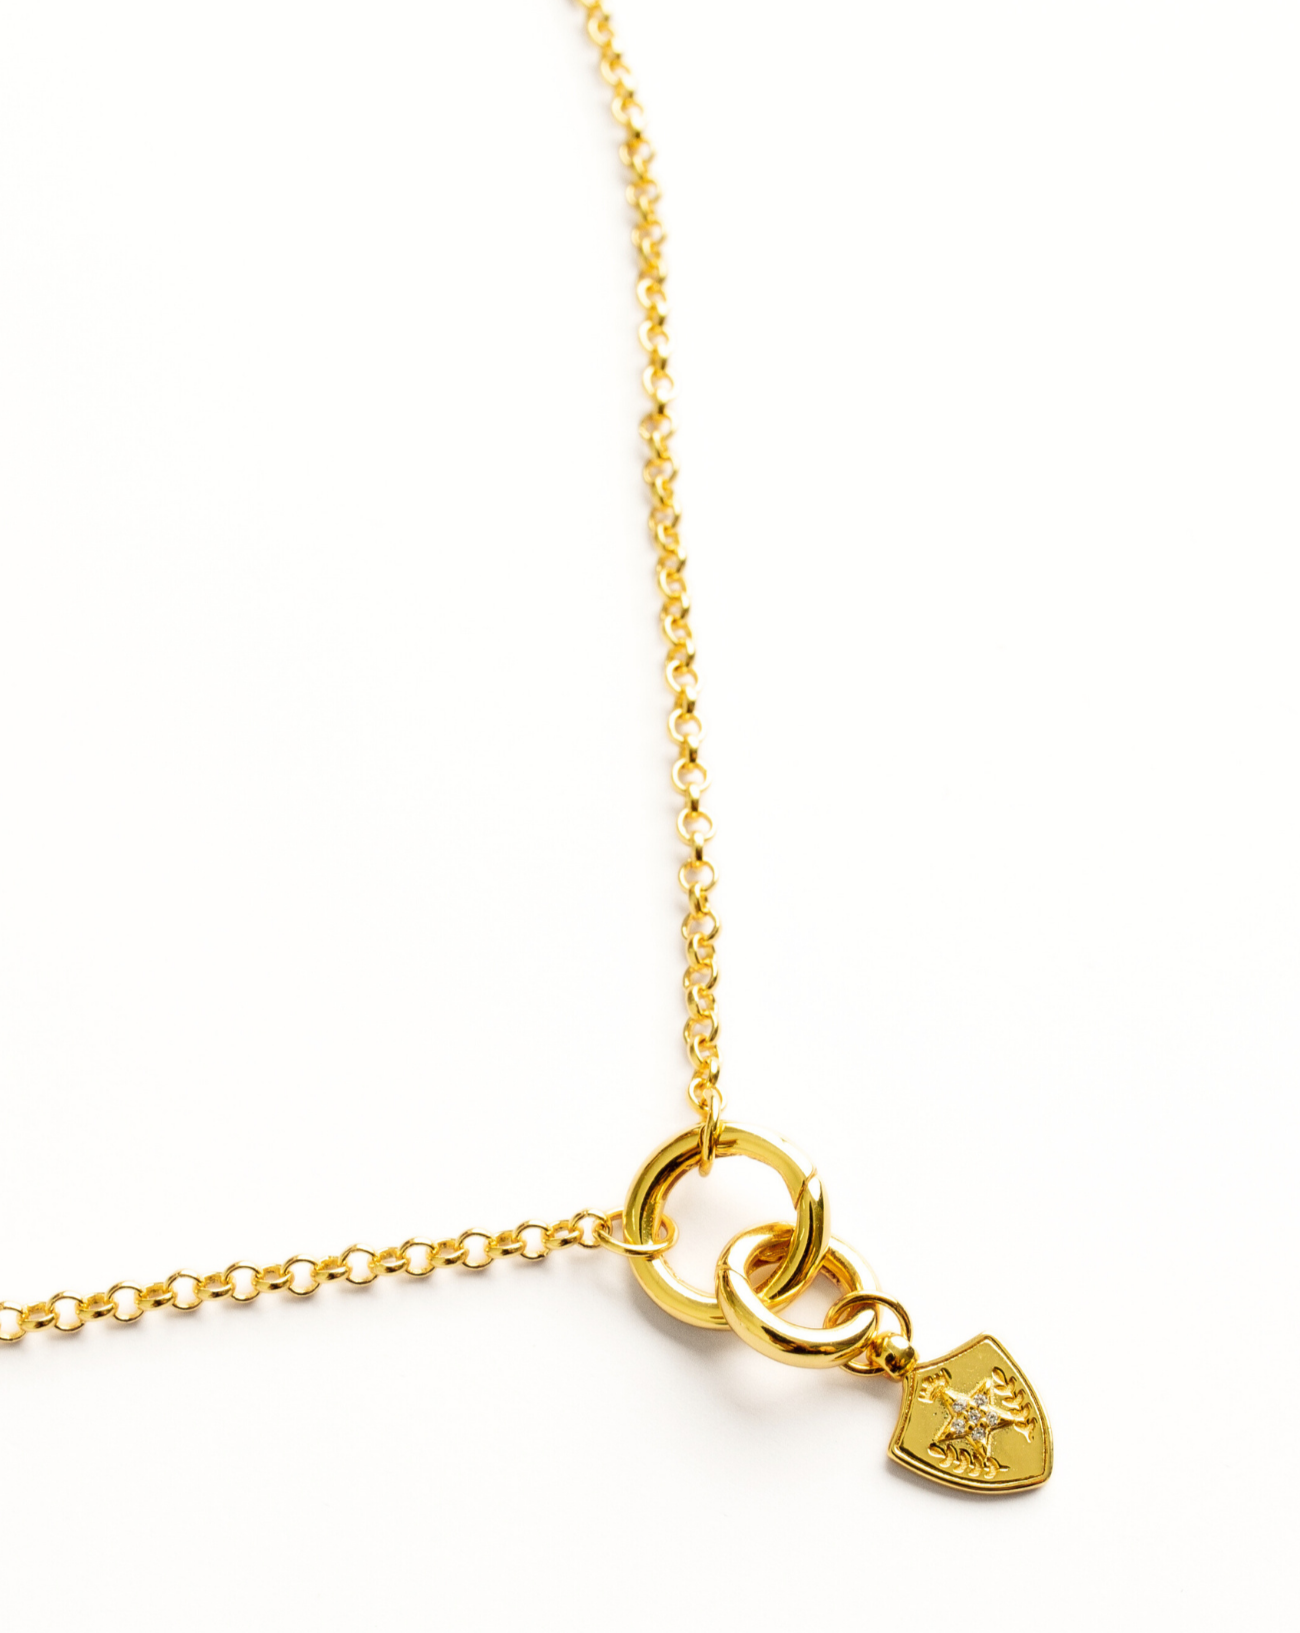 New Rolo Chain Necklace With Round Lock Gold (No Charm)